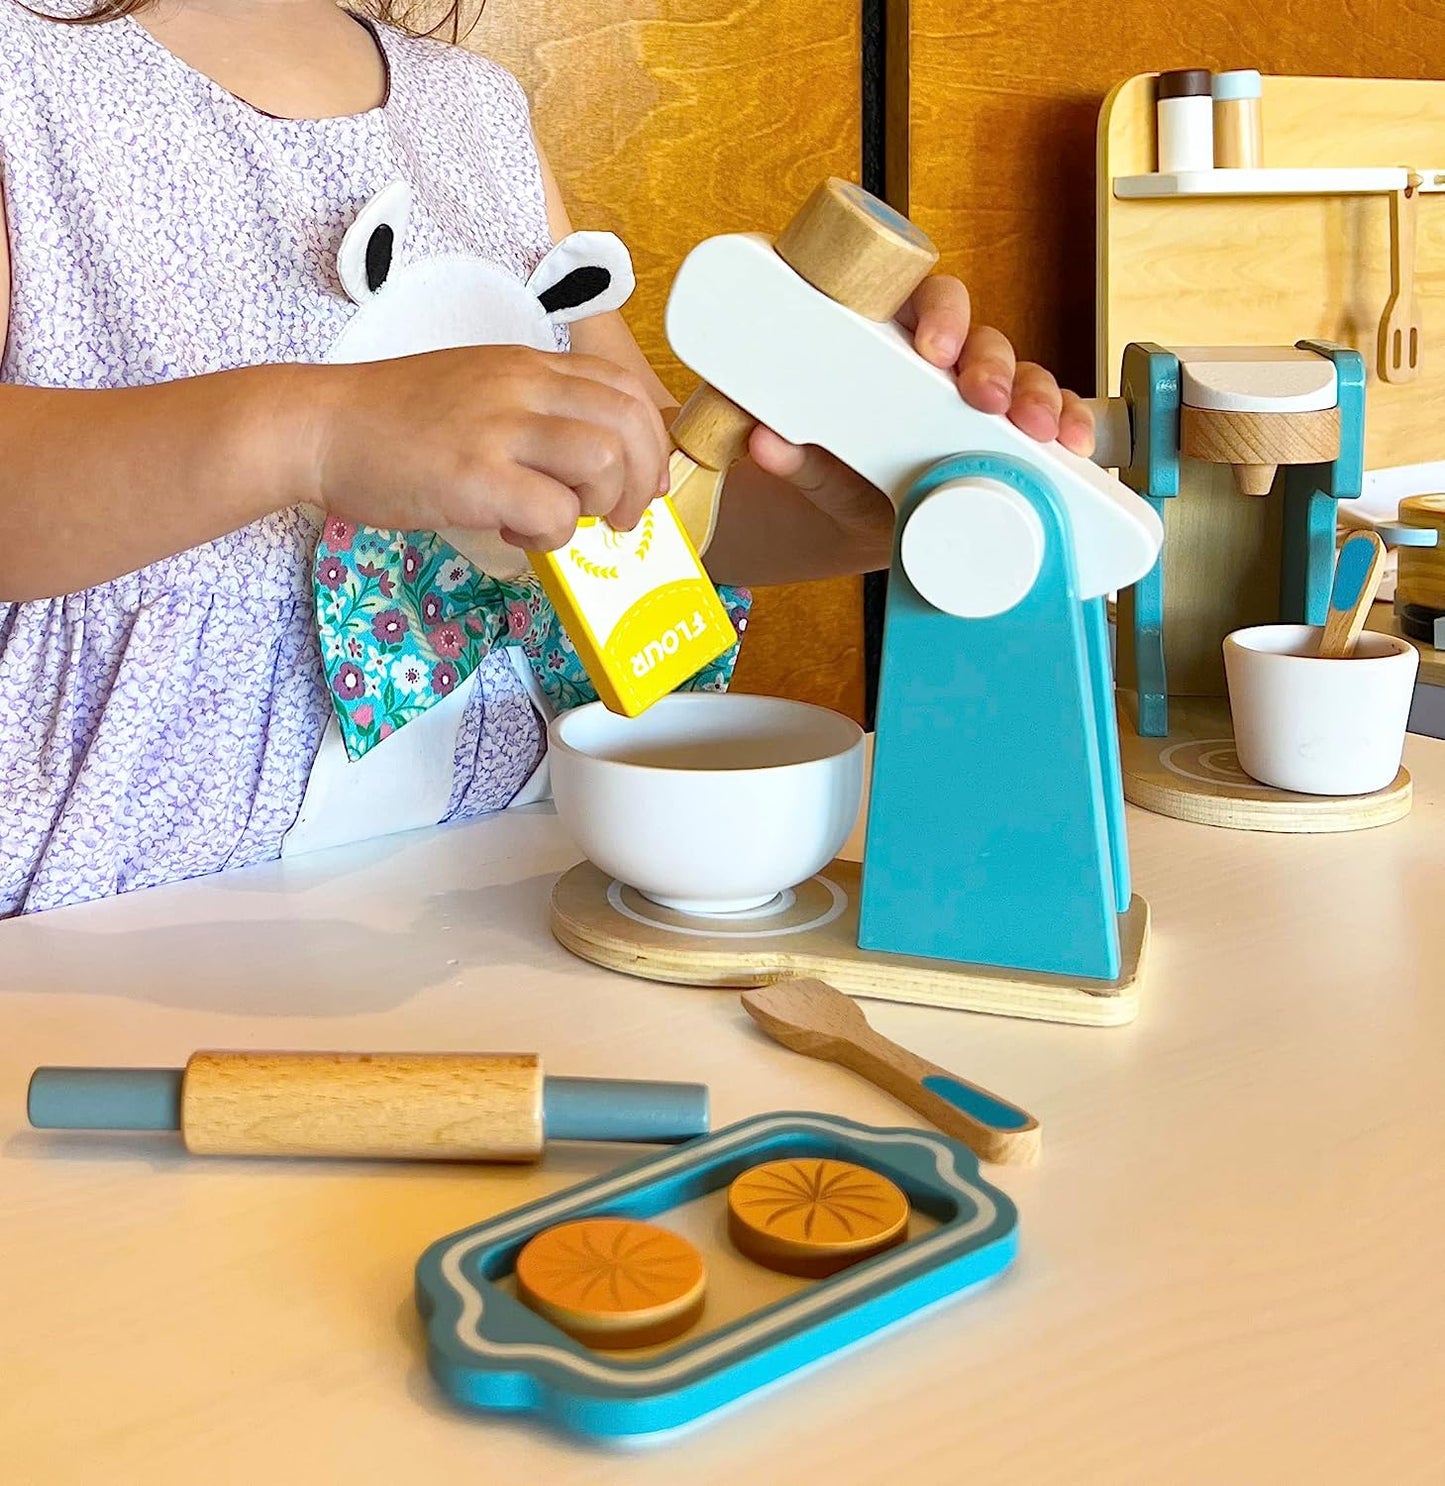 Wooden Toy Mixer Cookie Baking Set | Play Kitchen Accessories Blender Toy Cooking Appliances | Gifts for 3 Year Old Girl Boys